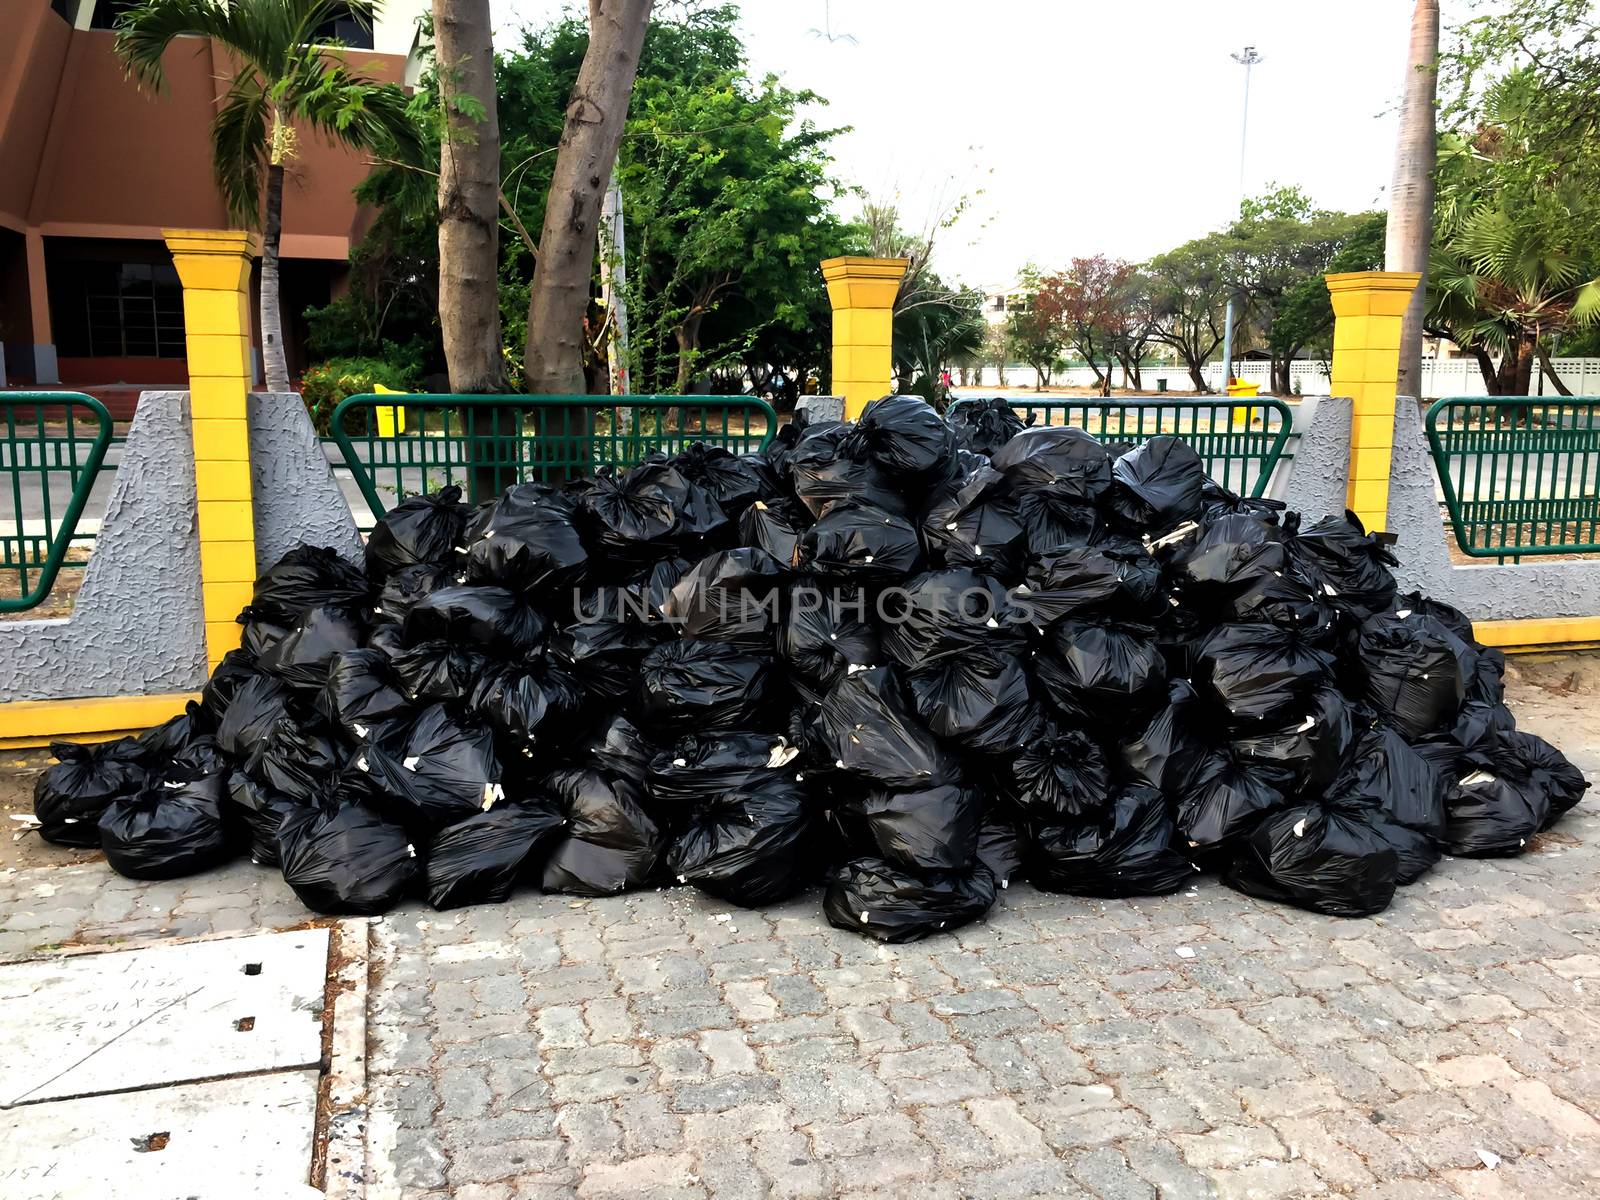 Many trash bags prepare for recycle